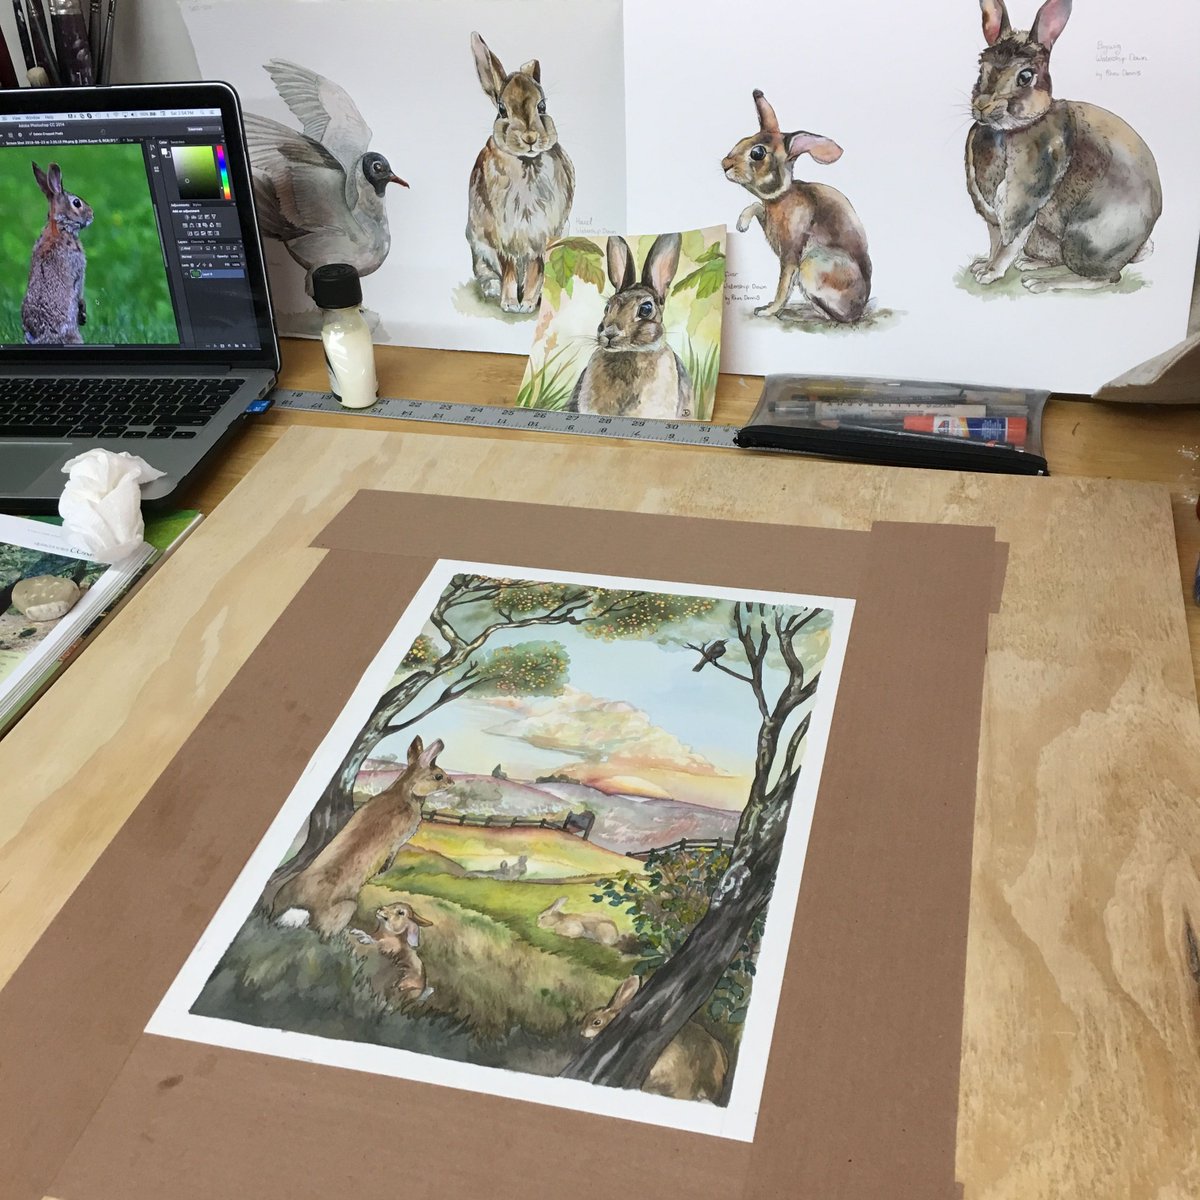 I really got so much out of painting this first full illustration. I've already started the next one! #illustration #watershipdown #illustrationart #illustratoroninstagram #watercolorillustration #watercolorartist #watercolours #paintingstories #watercolourpainting